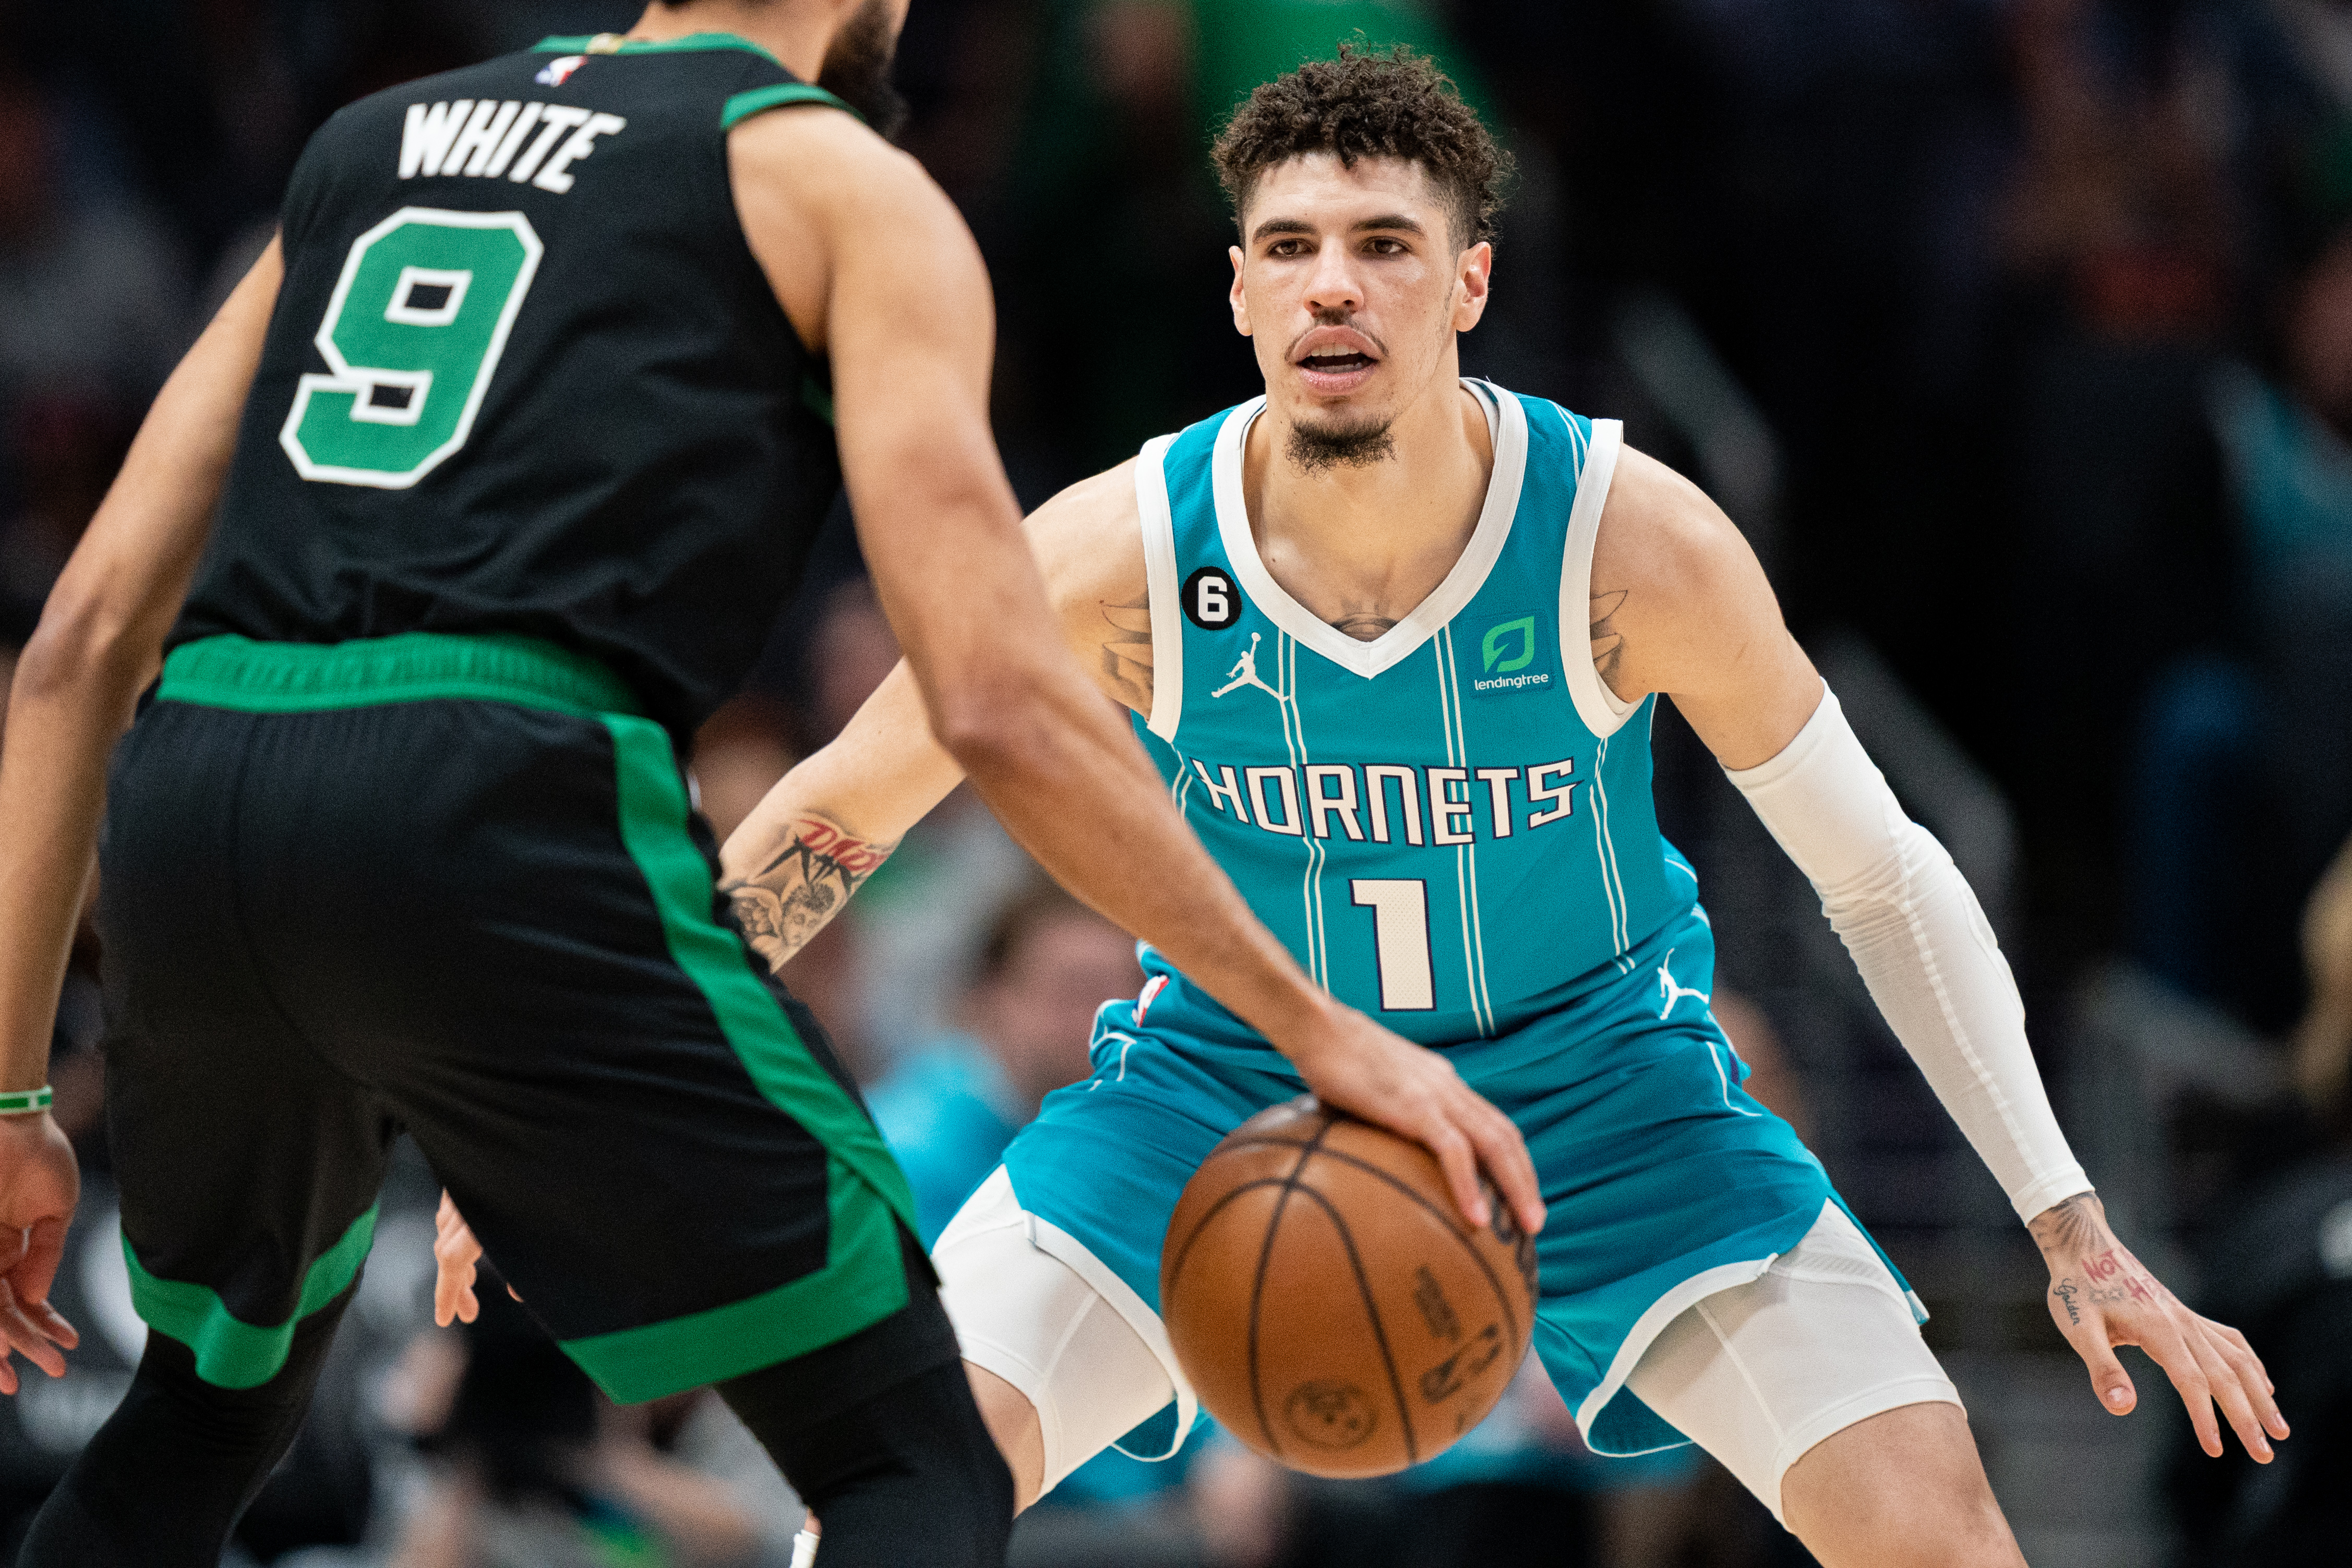 LaMelo Ball of the Charlotte Hornets guards Derrick White of the Boston Celtics during their game at Spectrum Center on January 16, 2023 in Charlotte, North Carolina.